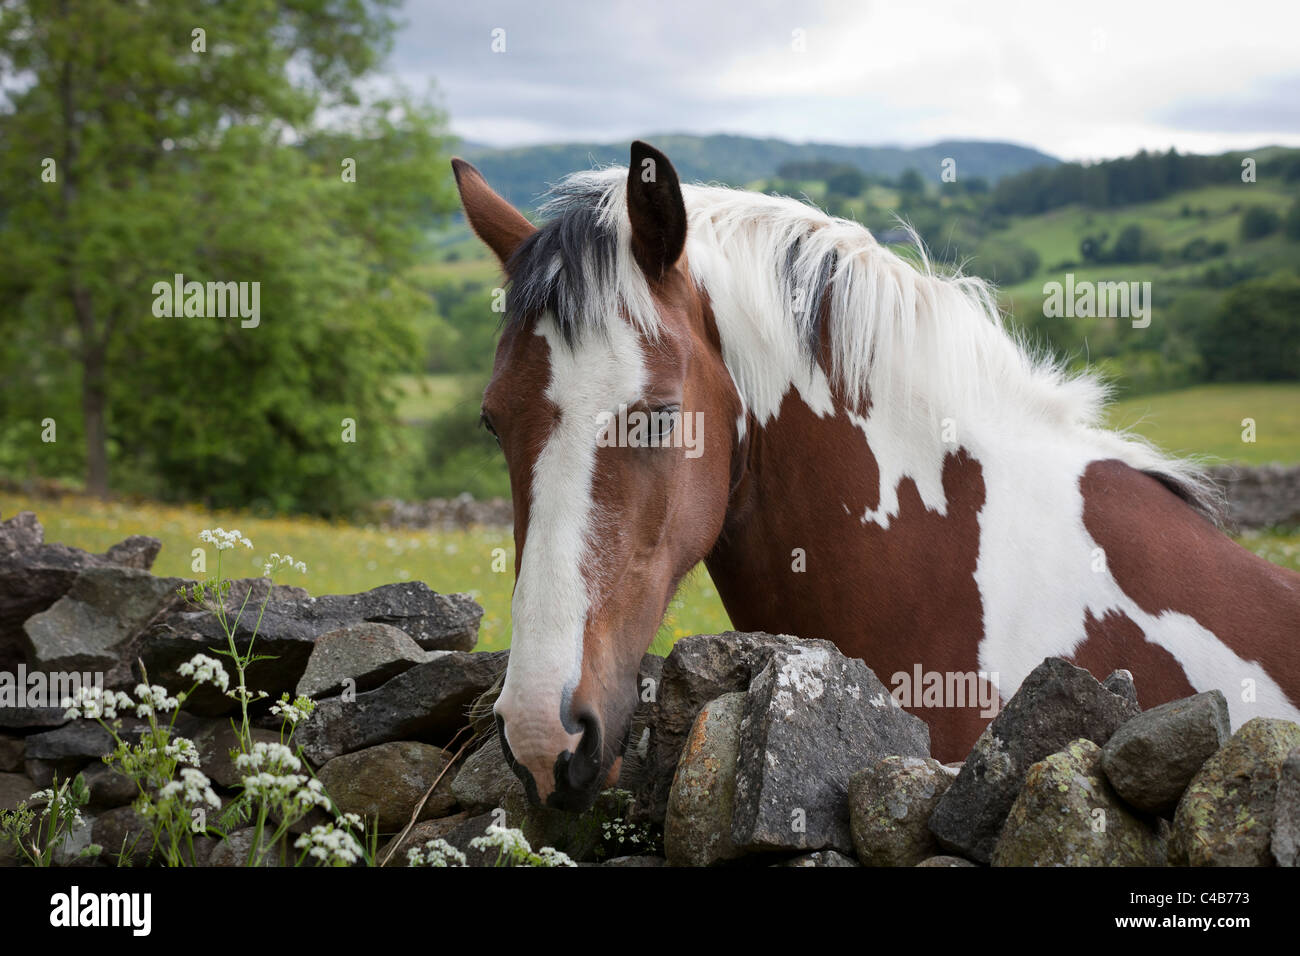 A skewbald horse leaning over a drystone wall showing just the head and neck with the Cumbrian Fells in the background Stock Photo